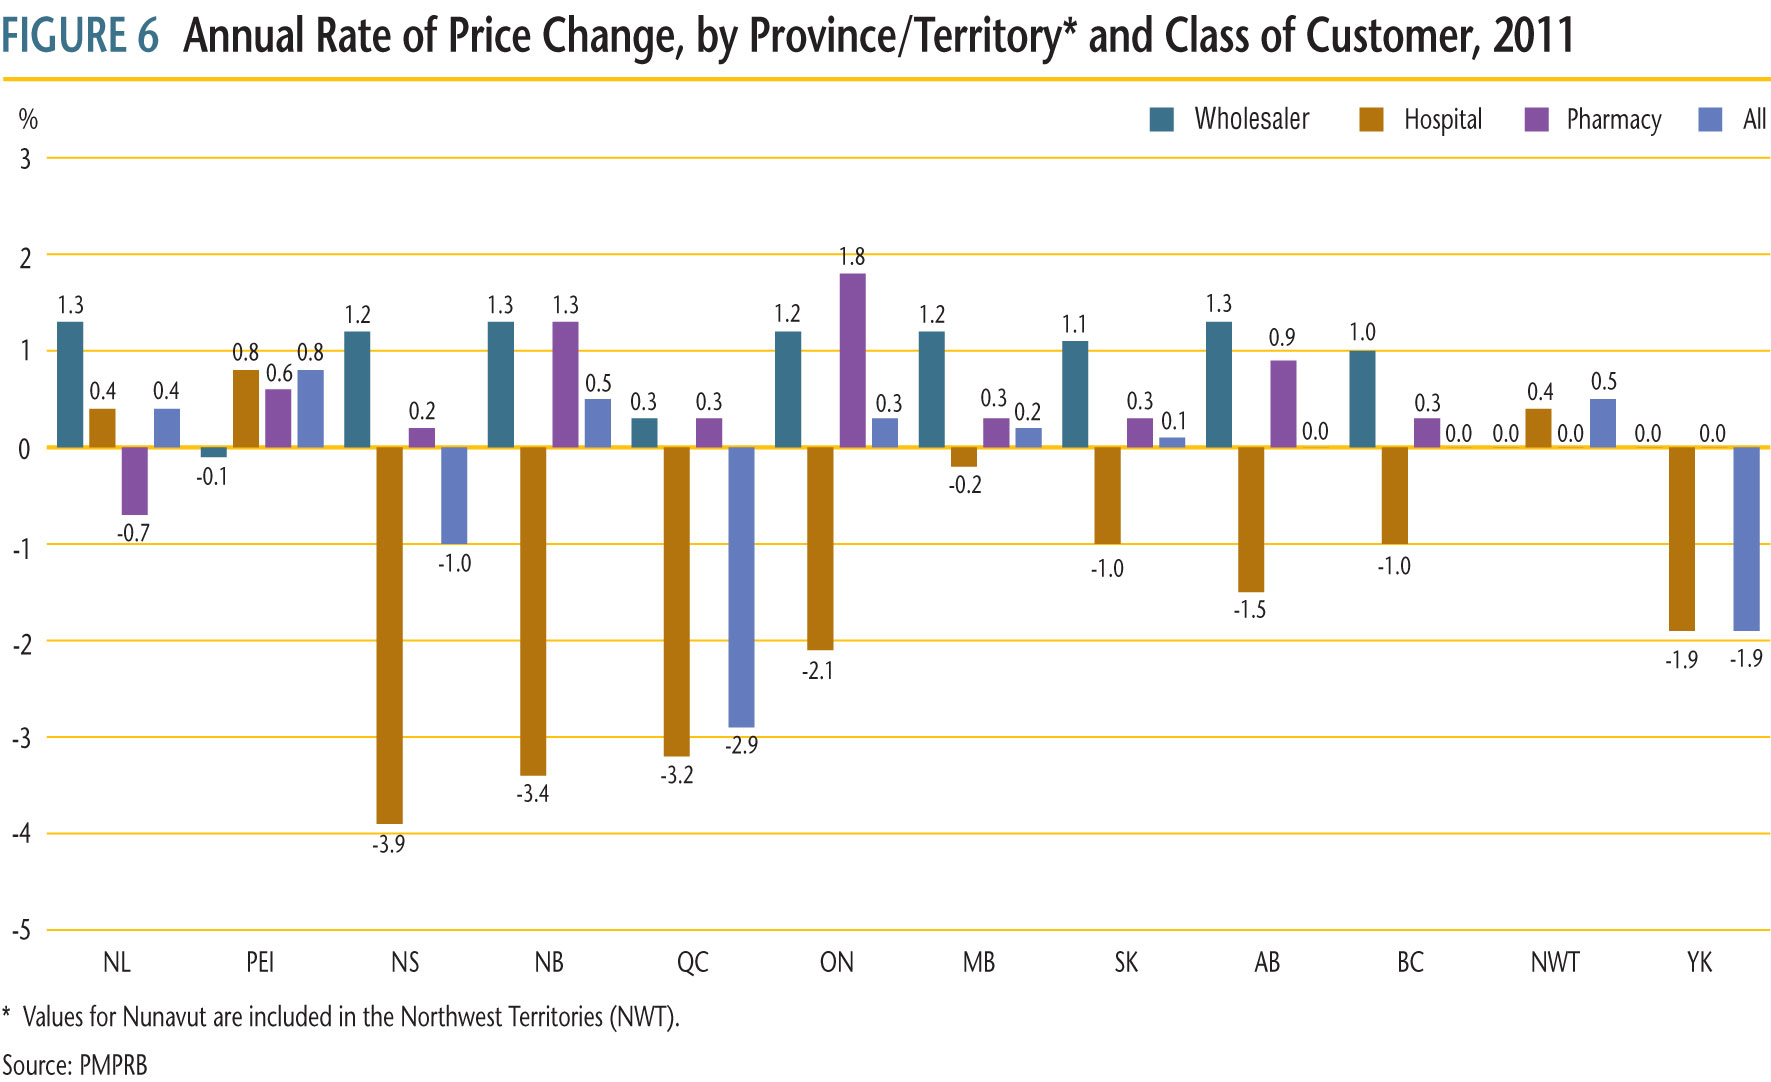 Figure 6 presents average annual rates of price change by province/territory